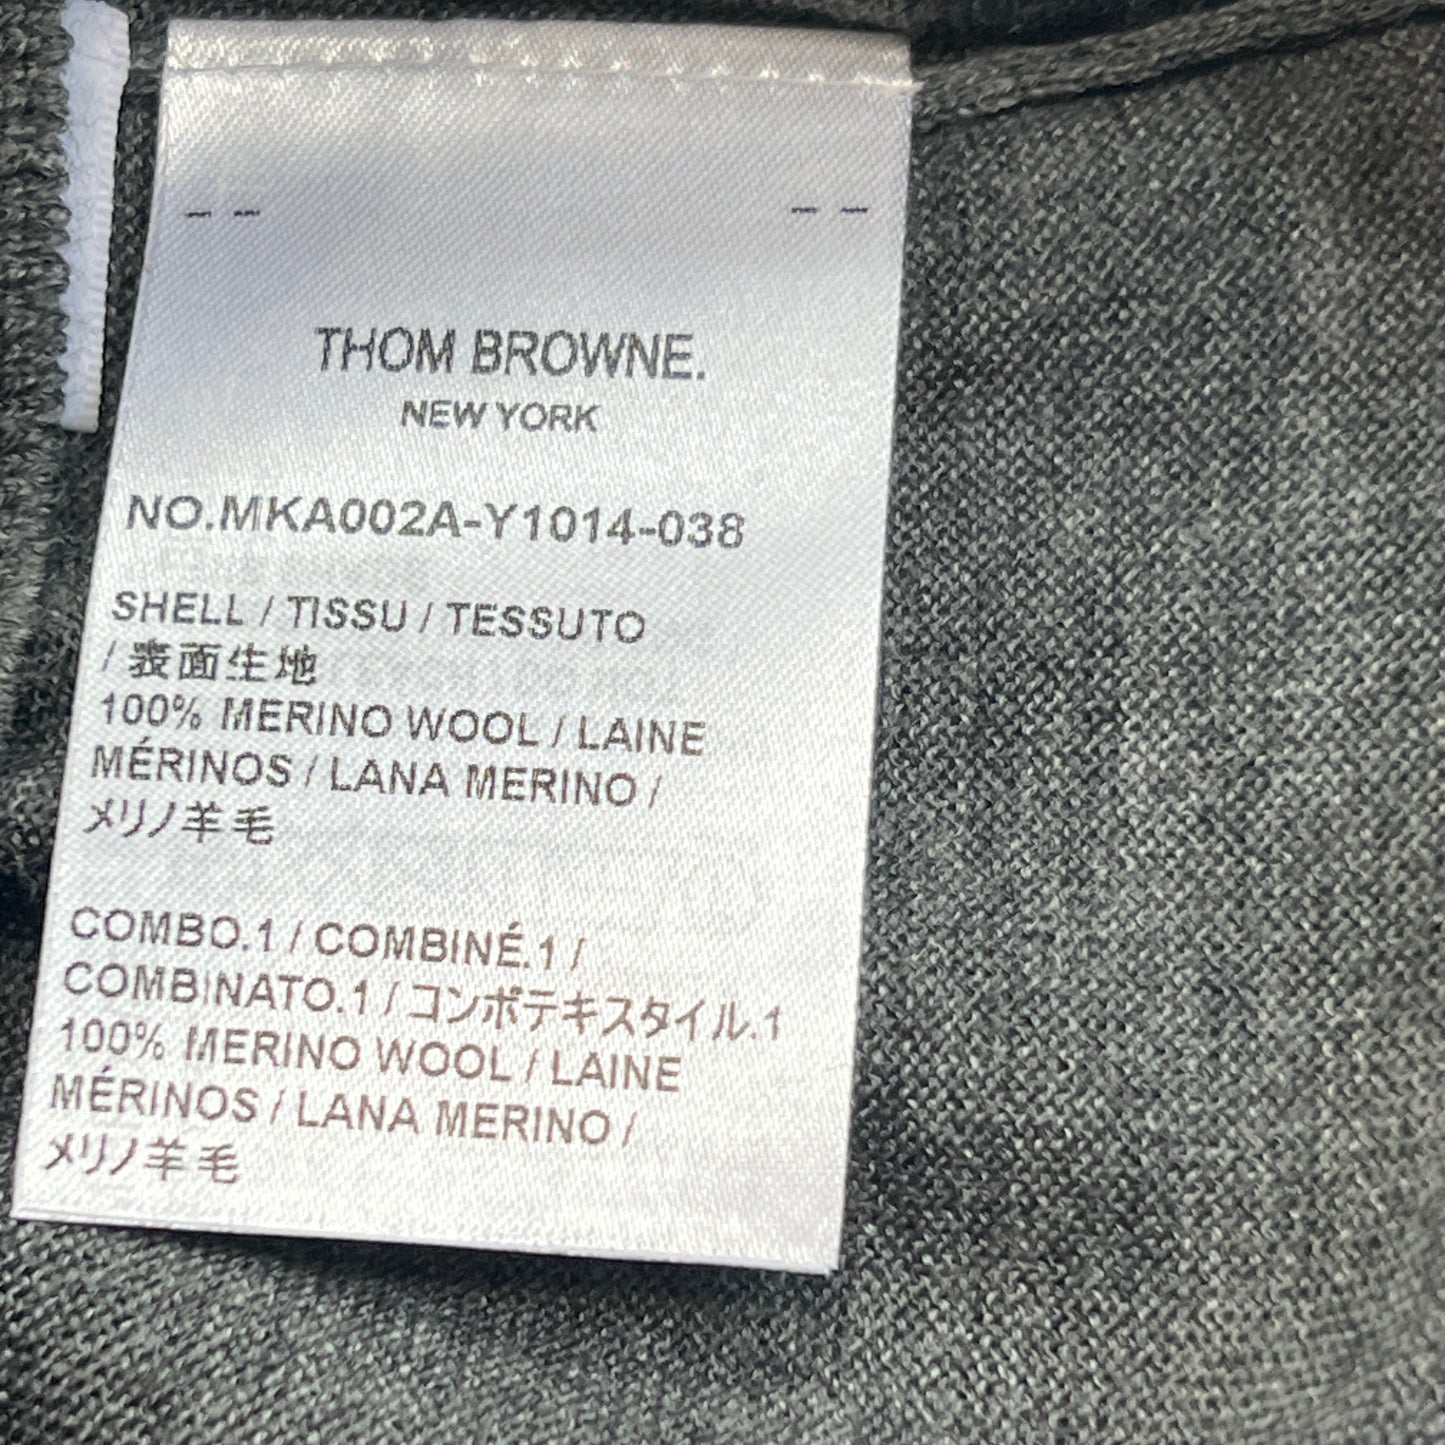 THOM BROWNE New York Classic Crewneck Pullover w/4 Bar Sleeve in Sustainable Fine Merino Wool Med Grey Size 2 (New)